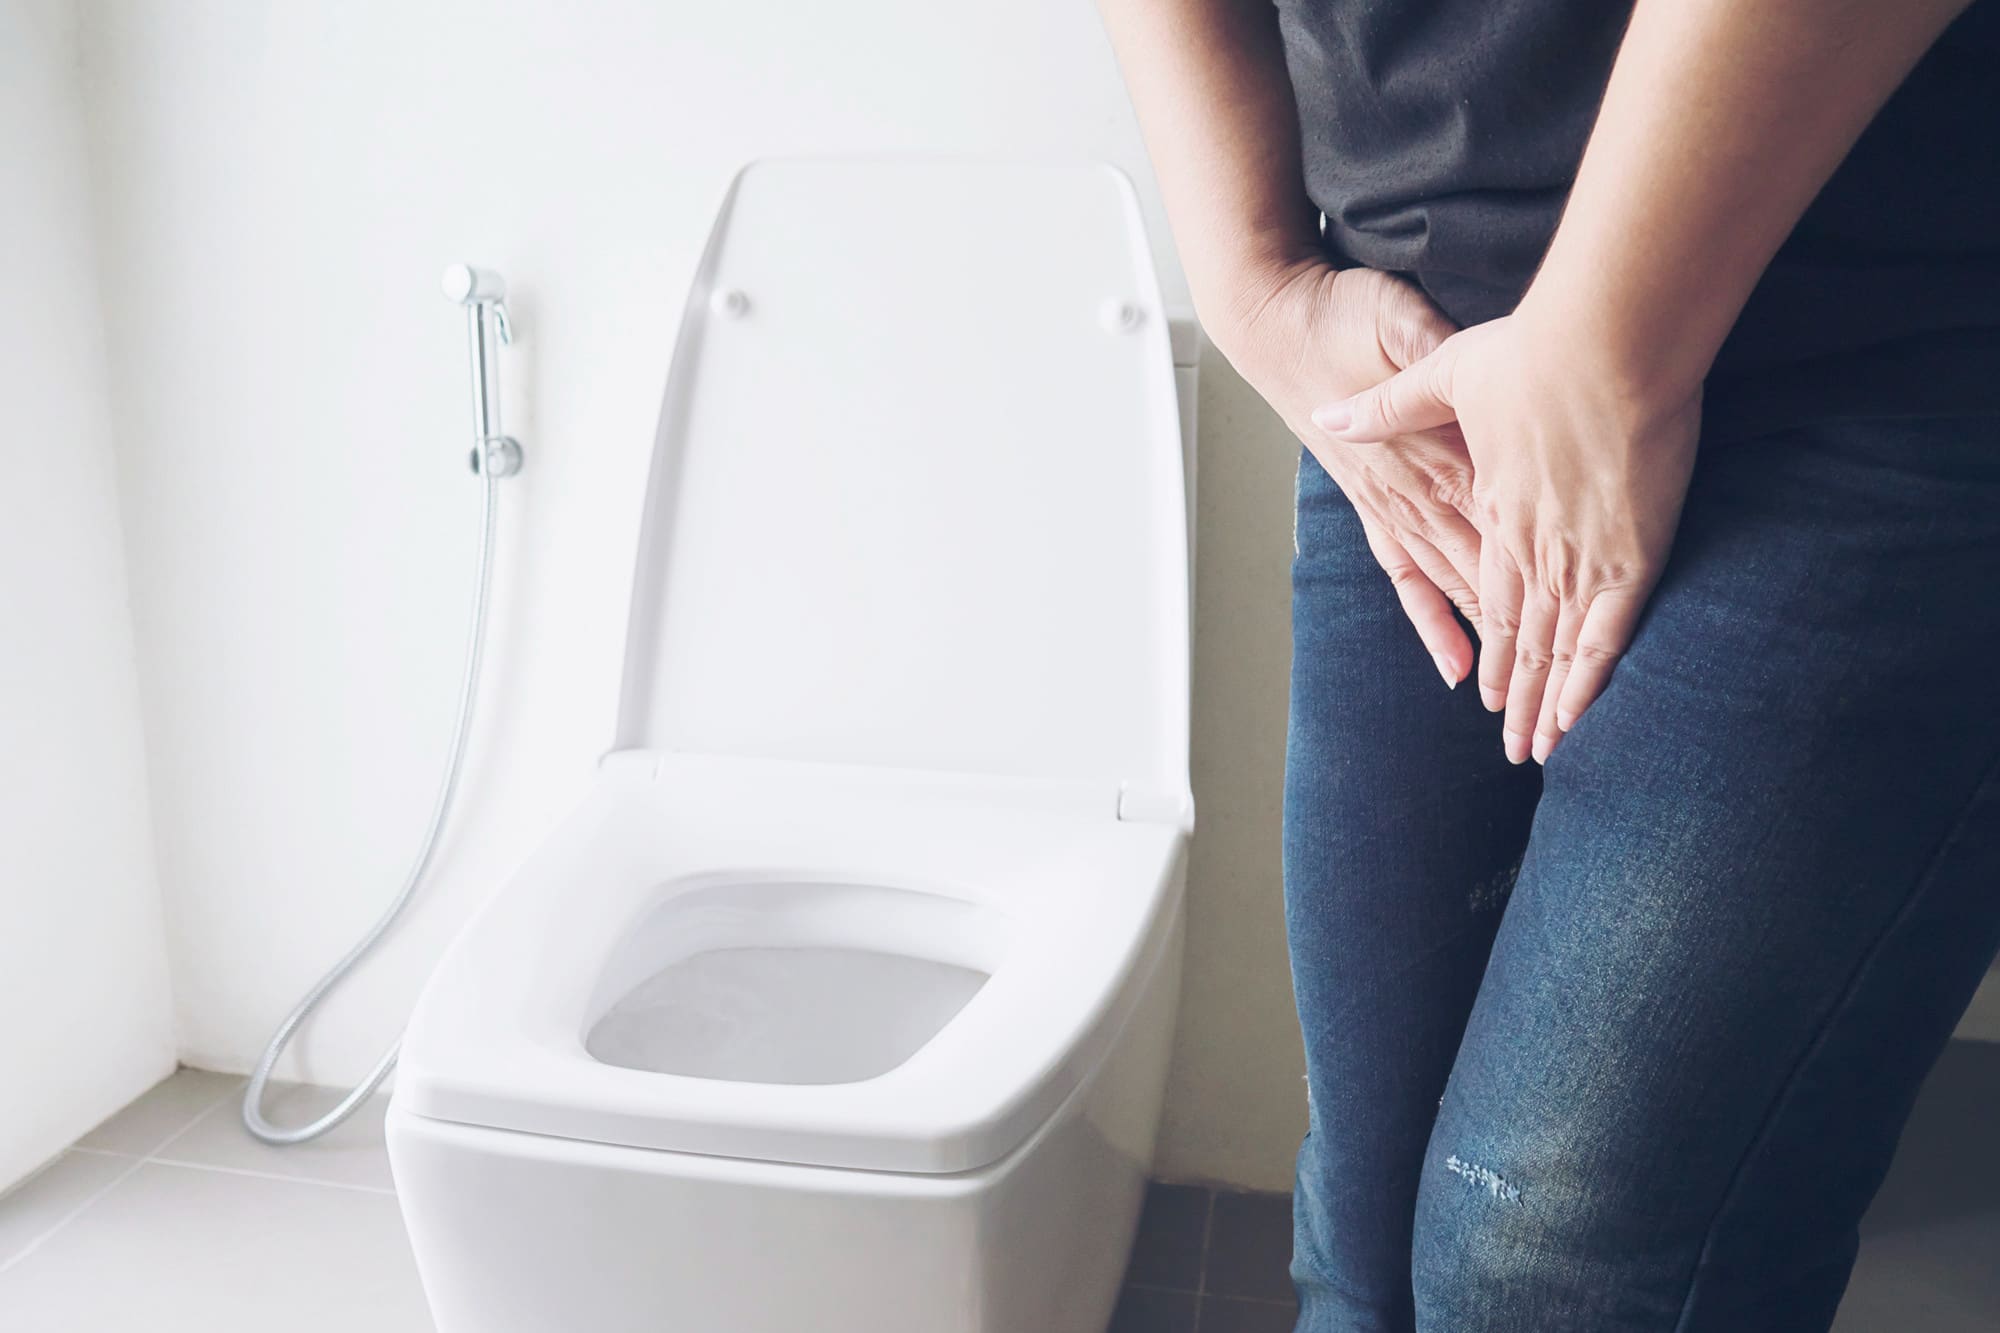 Overactive bladder: What do I need to know?